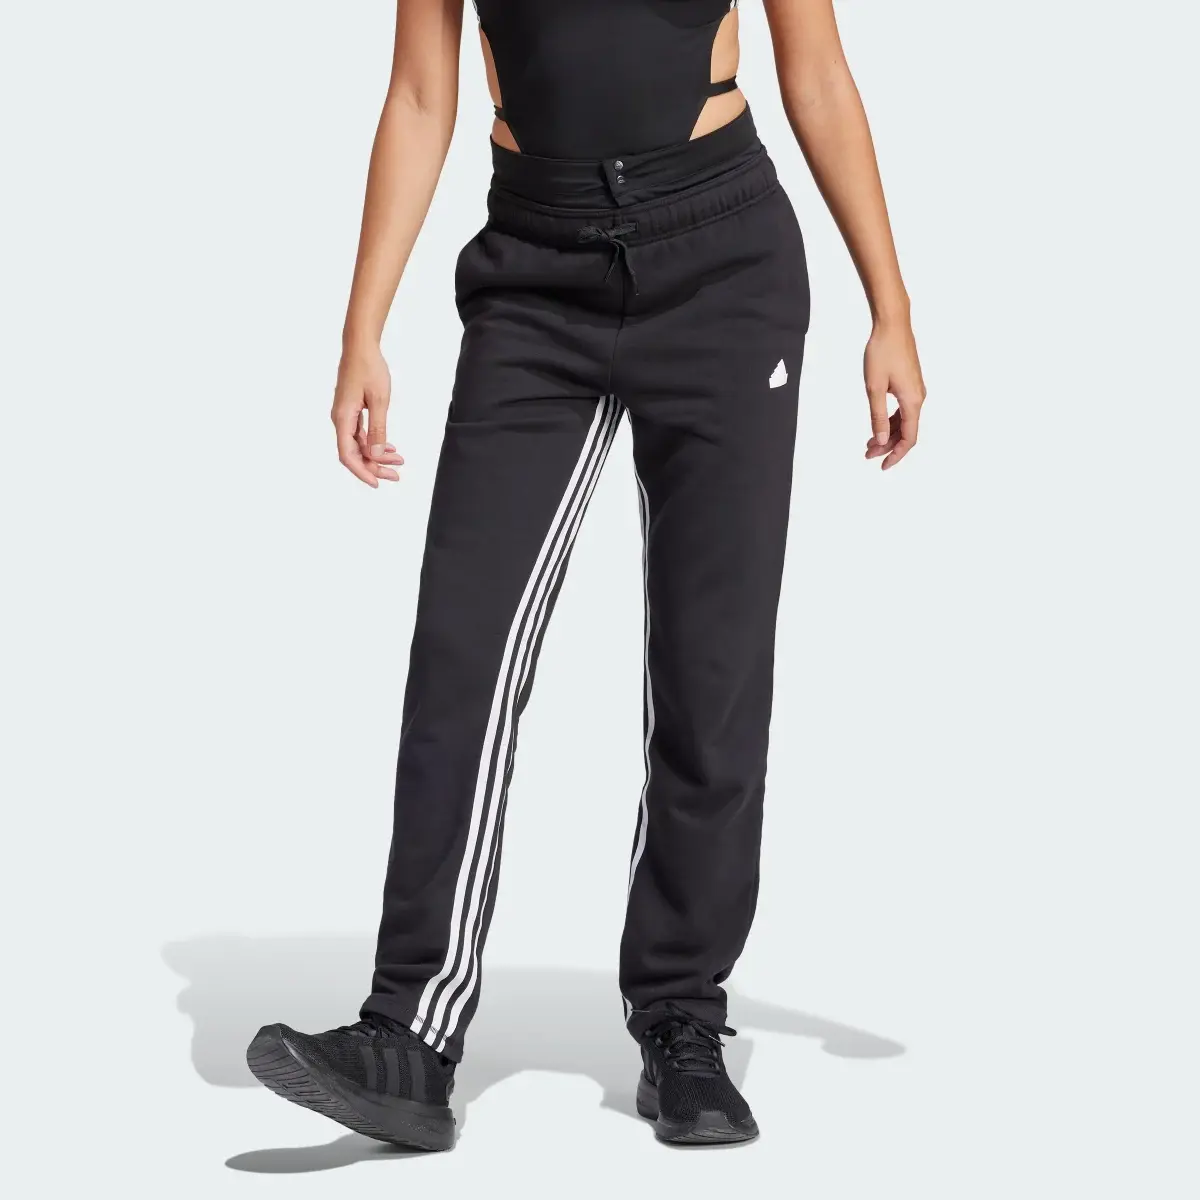 Adidas Express All-Gender Anti-Microbial Joggers. 1